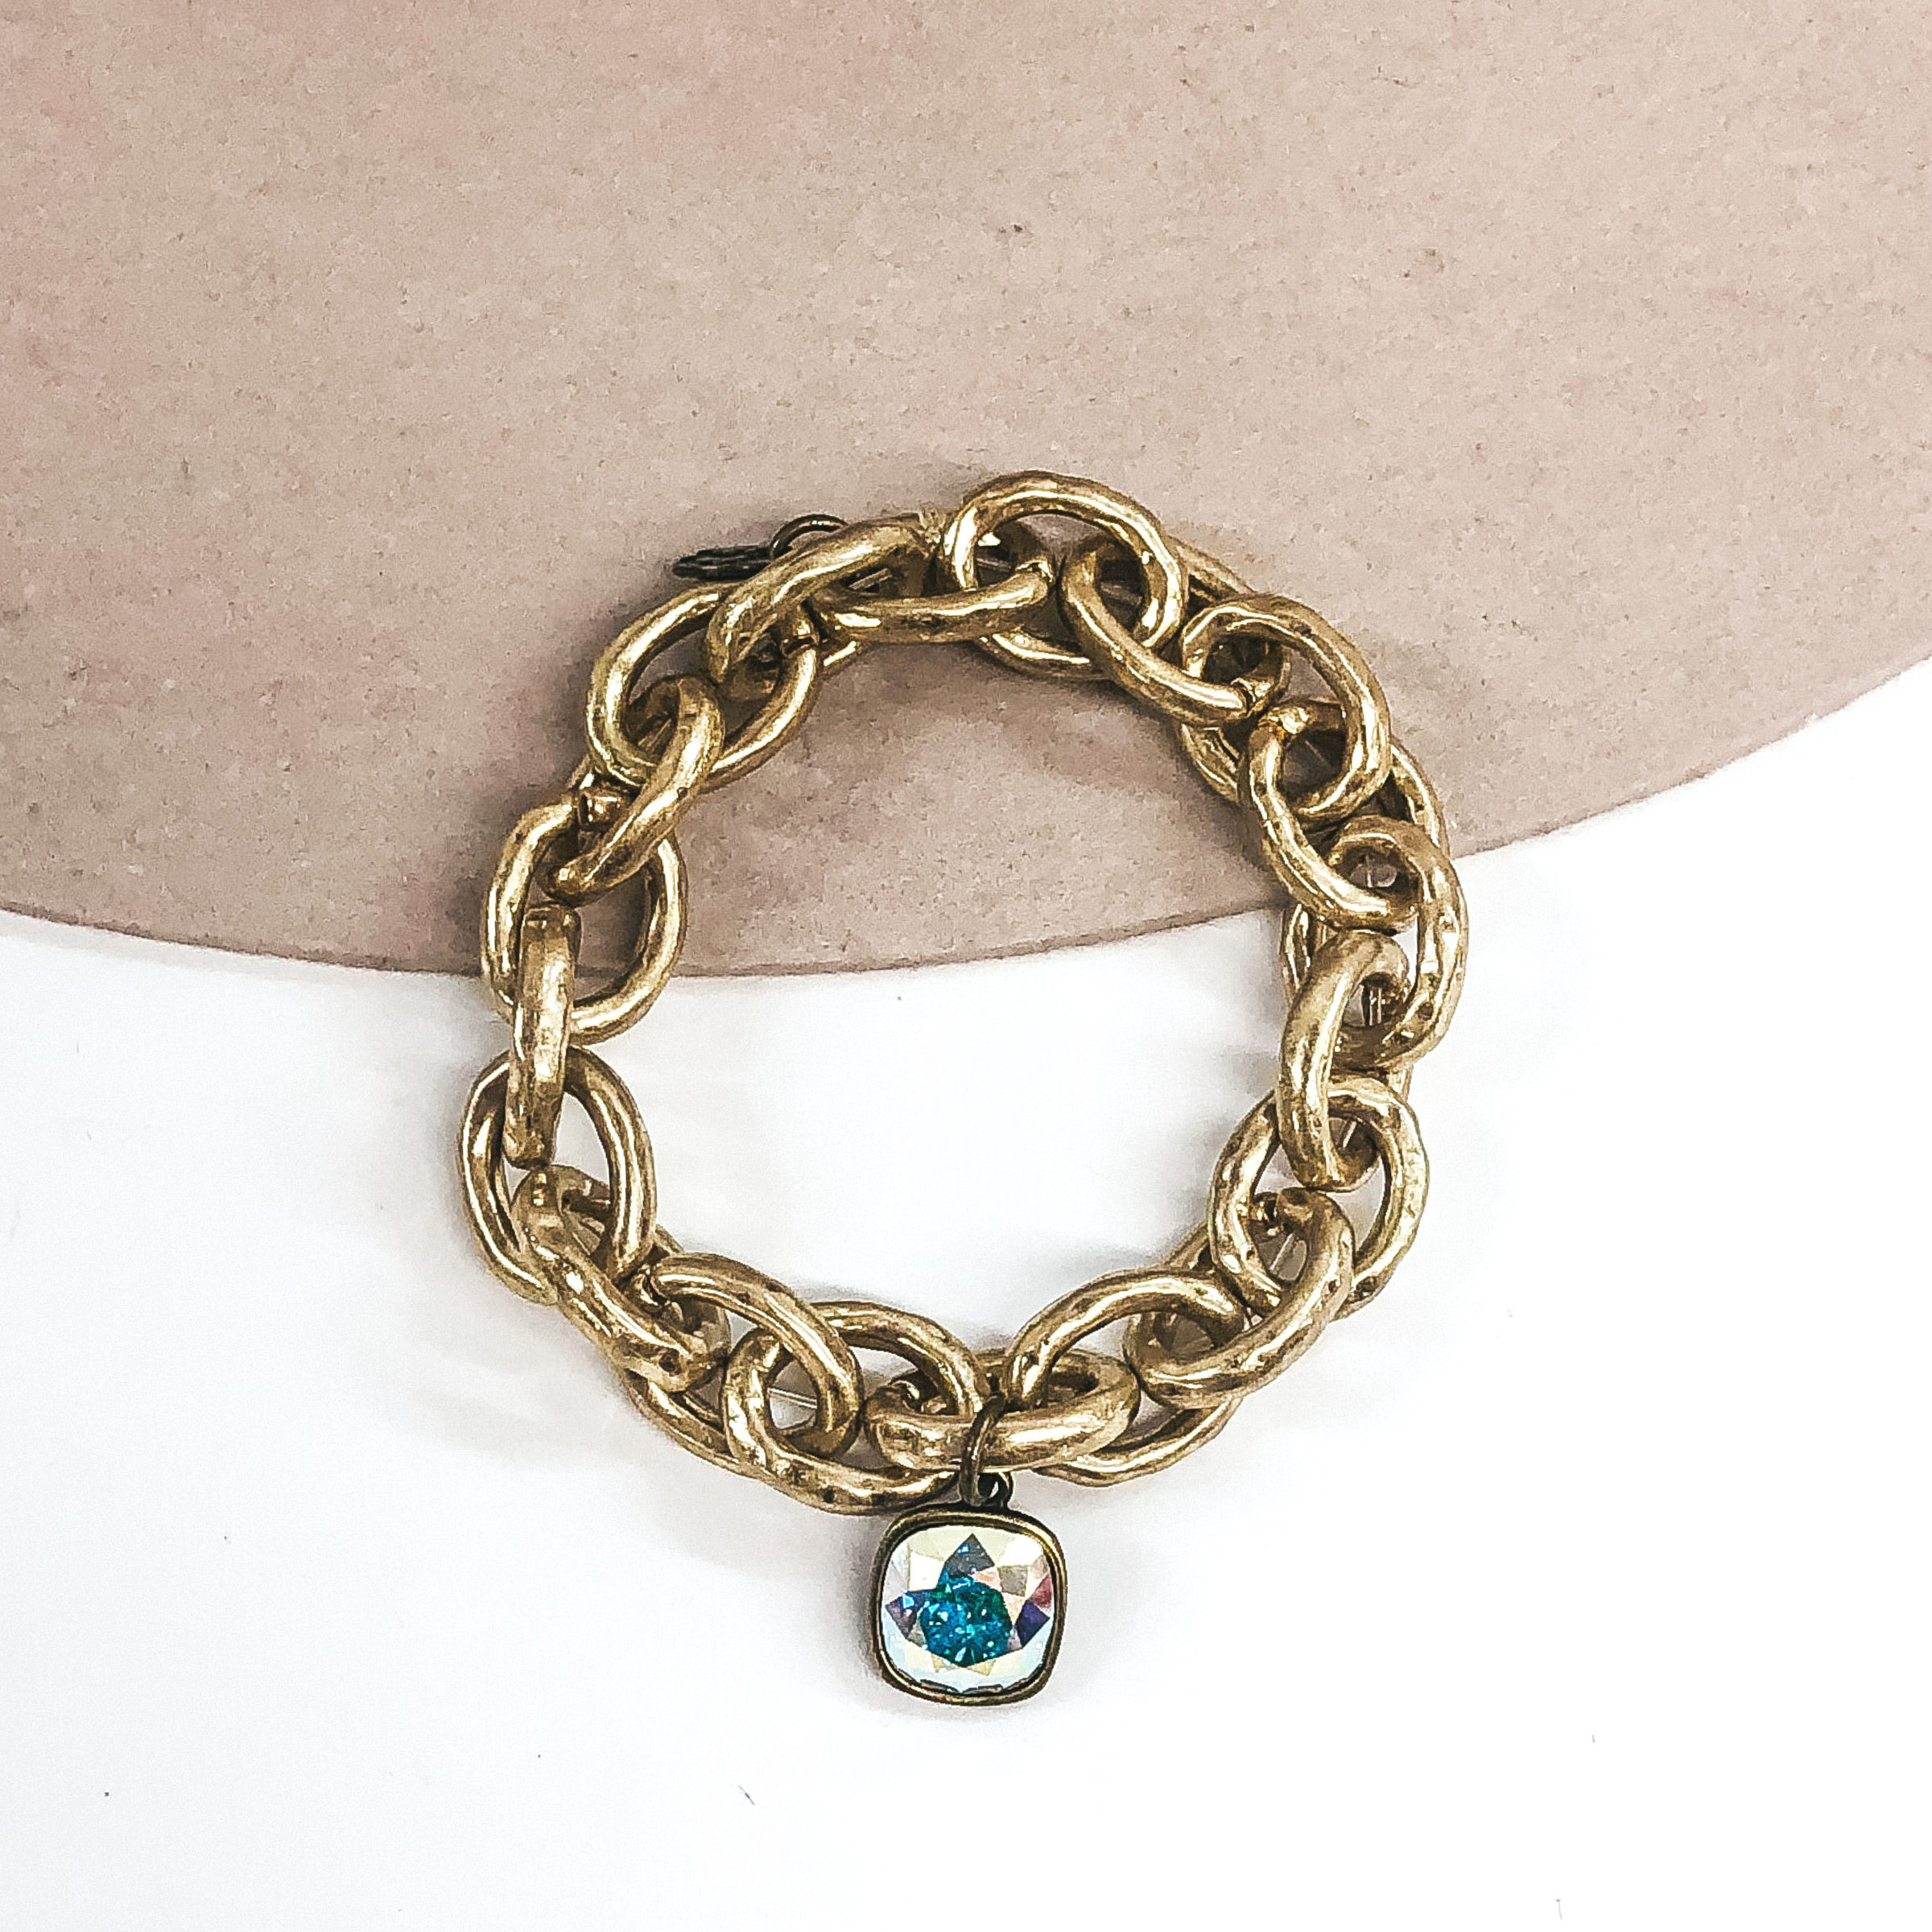 Chunky matte gold chain bracelet with a hanging cushion cut AB crystal that is in a bronze setting. This bracelet is pictured on a beige and white background. 